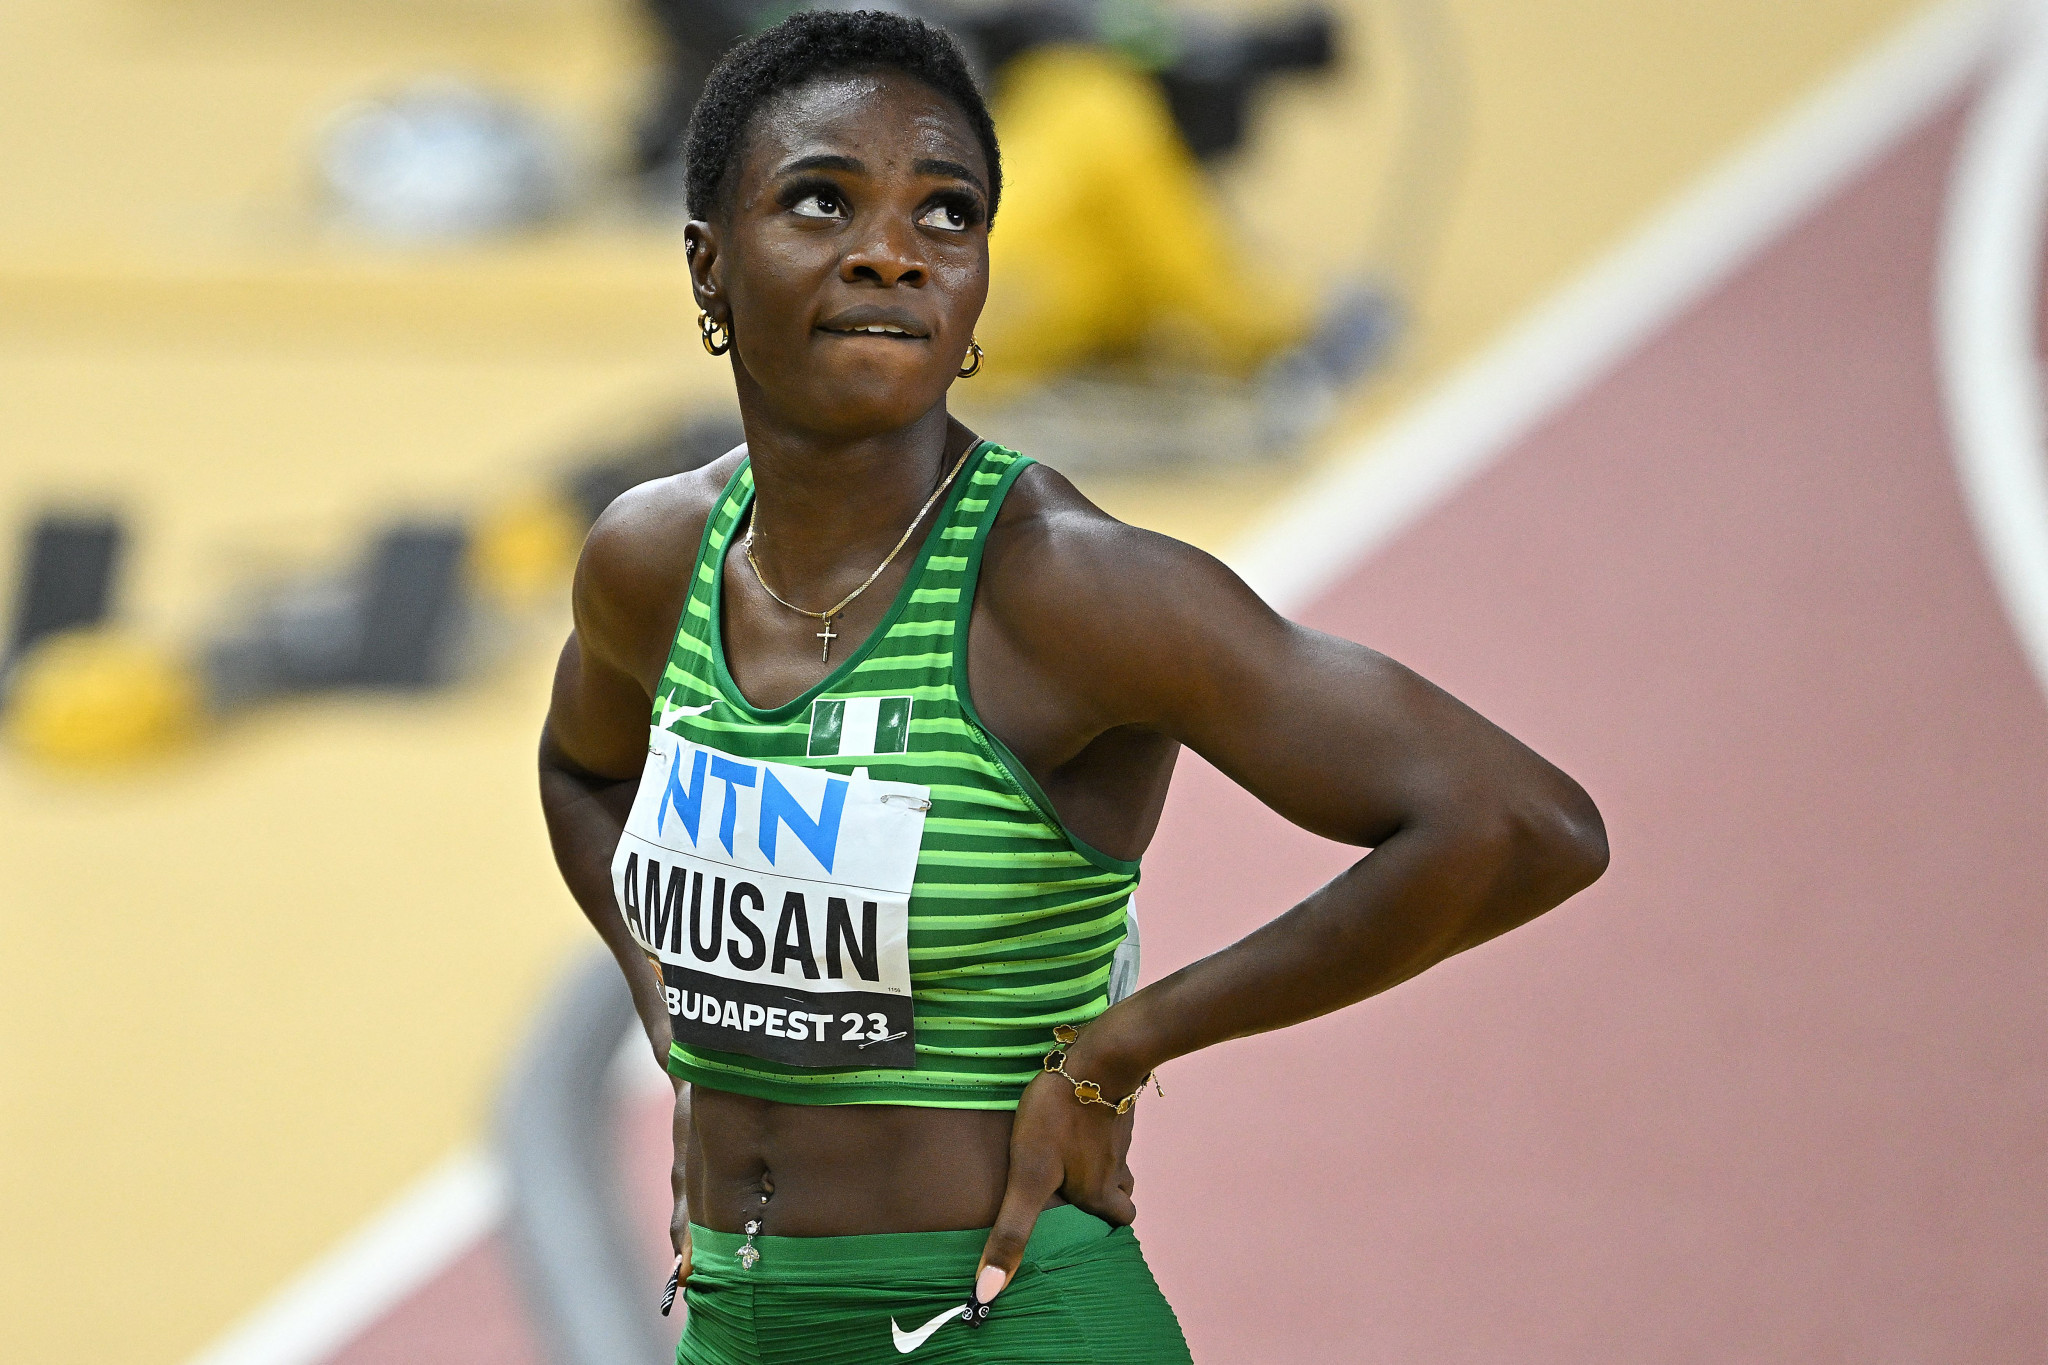 The Athletics Integrity Unit has appealed against the decision to clear Nigeria's former 100m hurdles world champion Tobi Amusan of whereabouts failures ©Getty Images